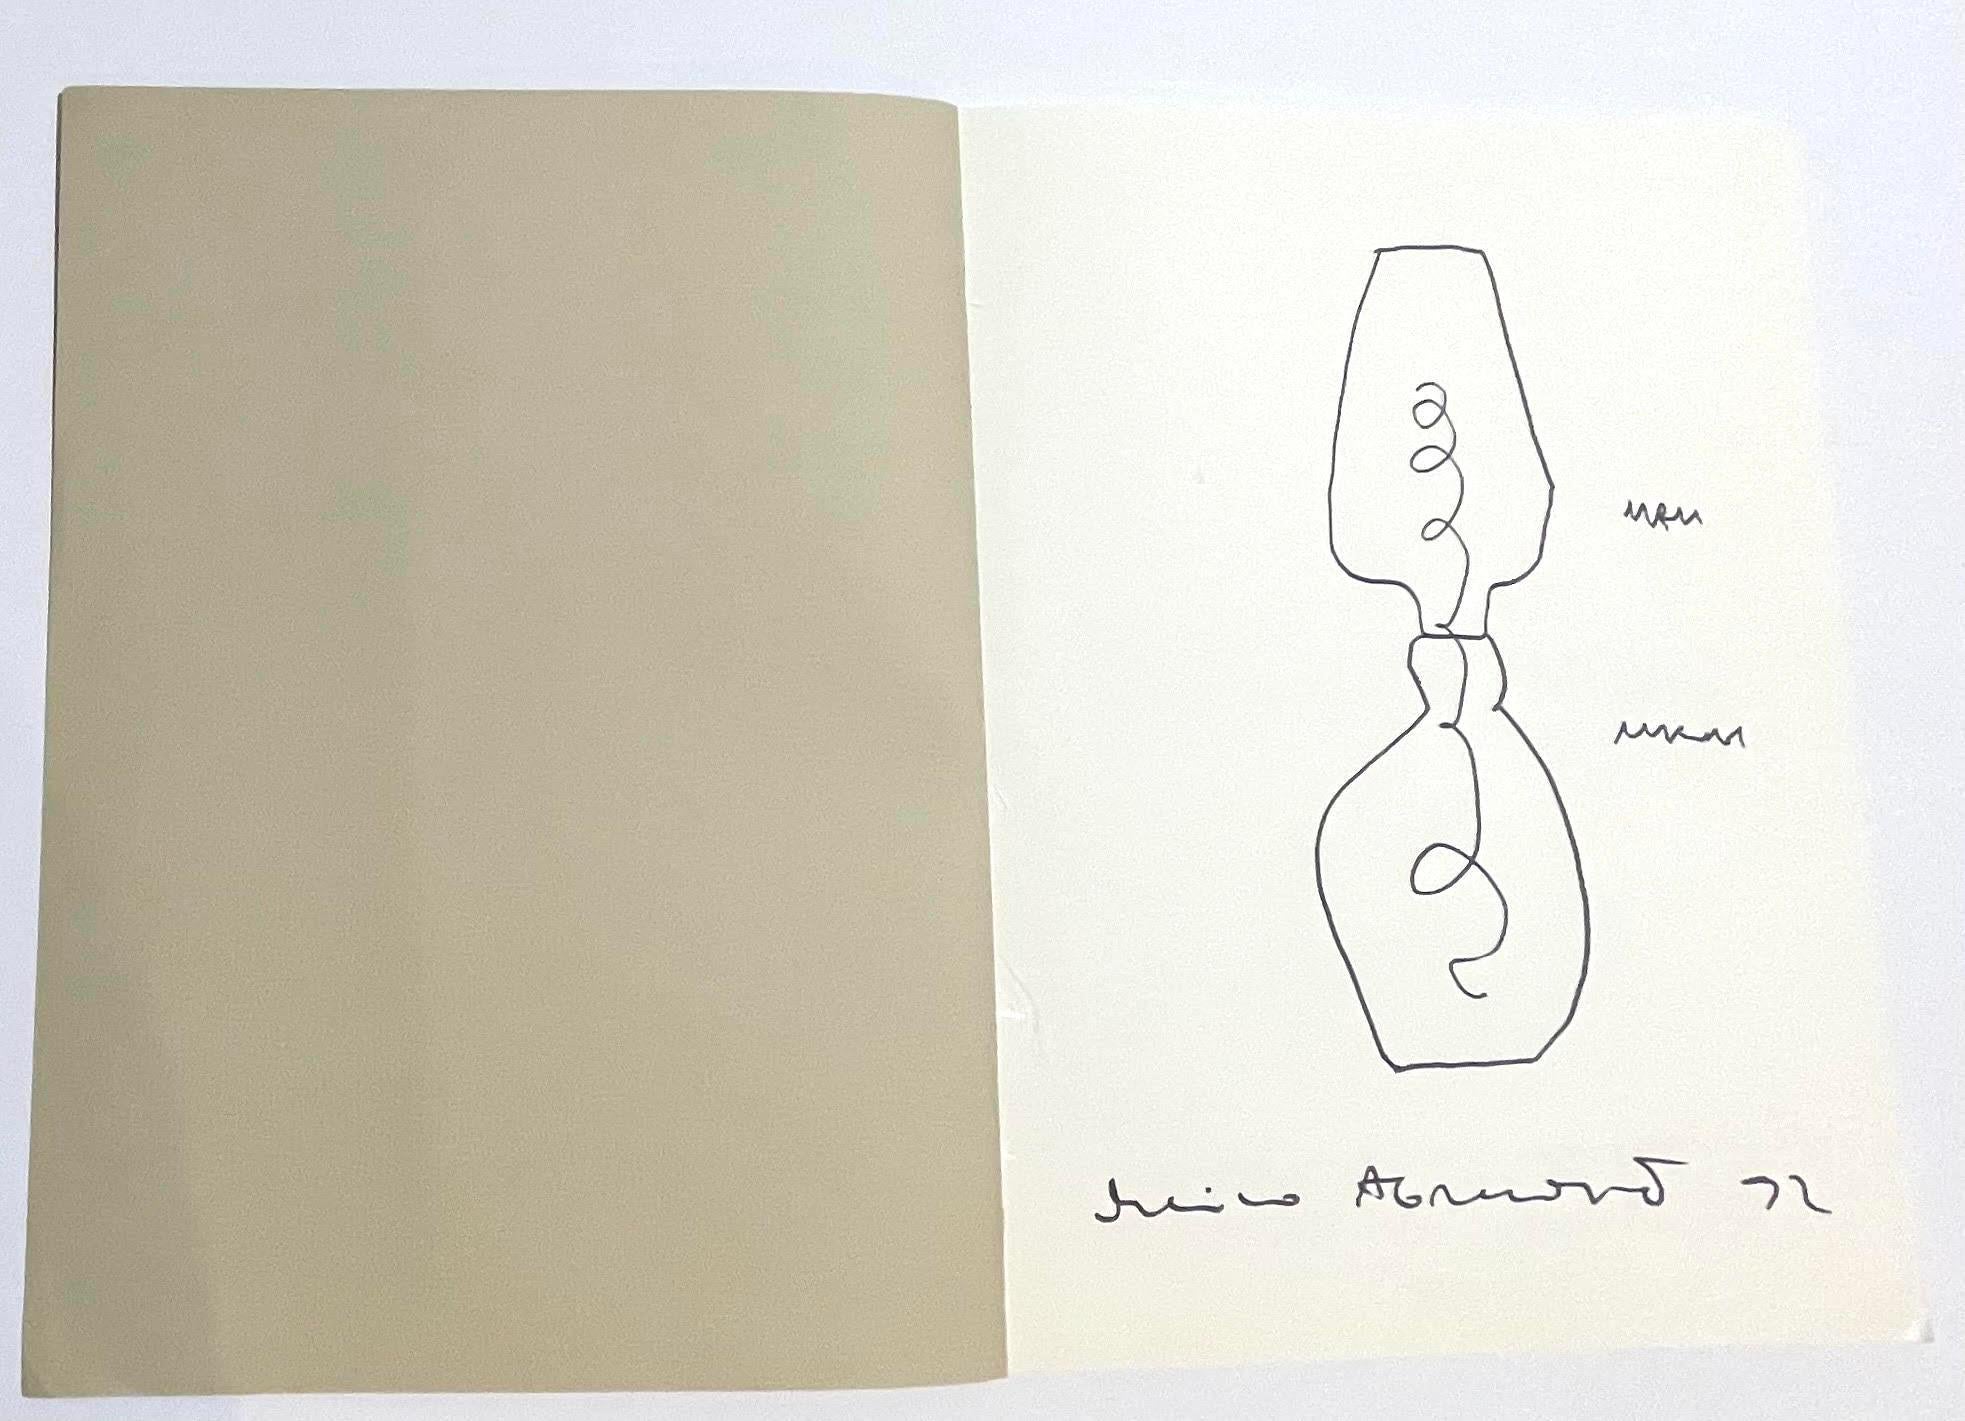 Marina Abramović
Untitled hourglass drawing, 1992
Drawing done in black marker, hand signed and annotated and held inside the softback catalogue for the artist's 1992 Beaux Arts exhibition in Paris
Original drawing is hand signed, annotated and